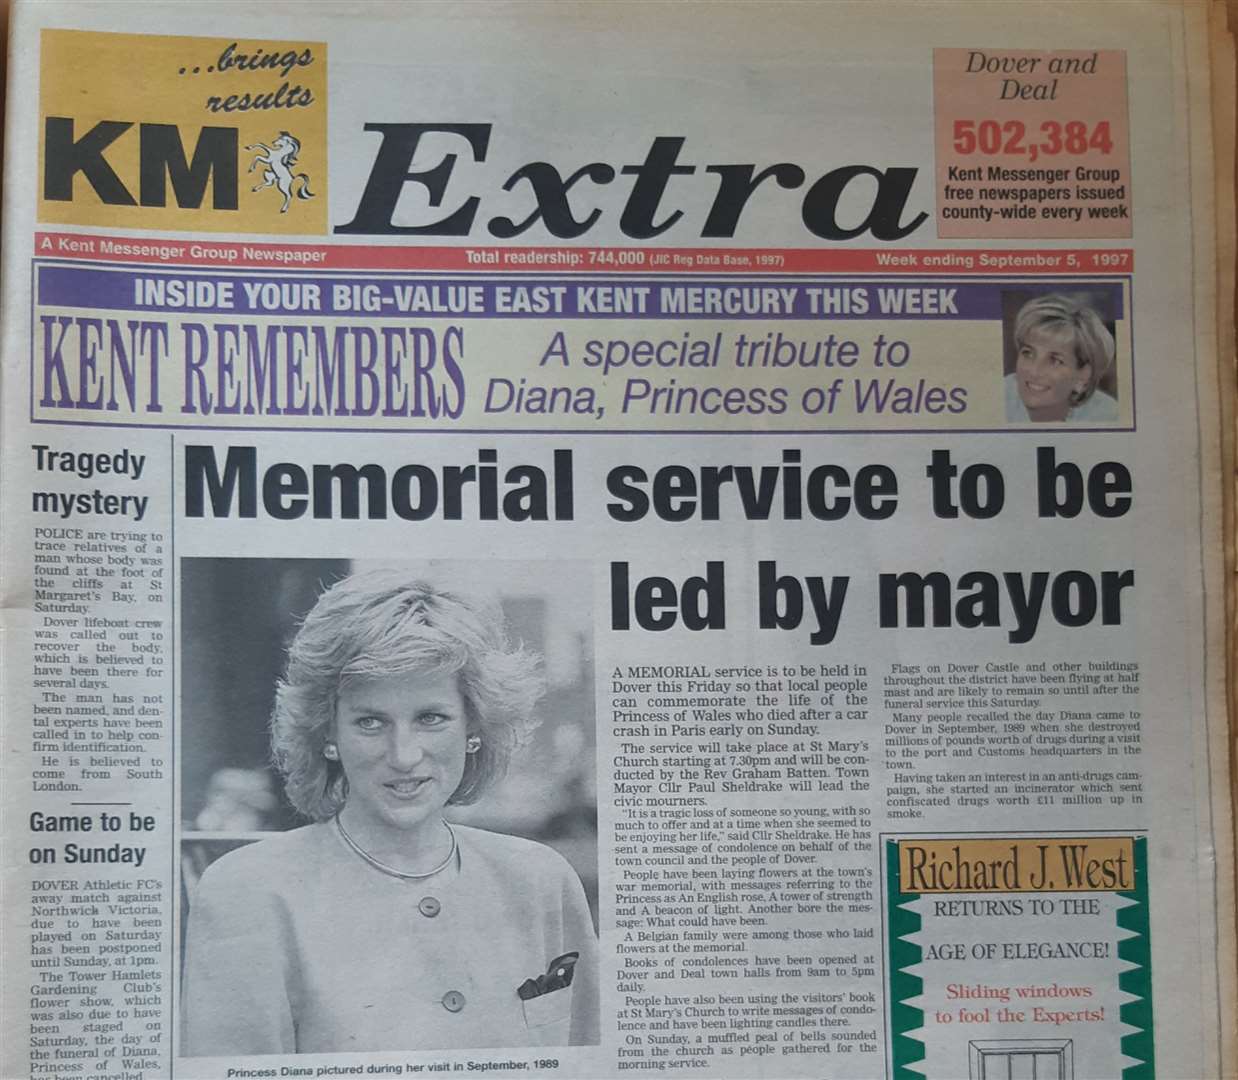 The Dover and Deal edition of the KM Extra freesheet series on September 5, 1997. Picture: KMG